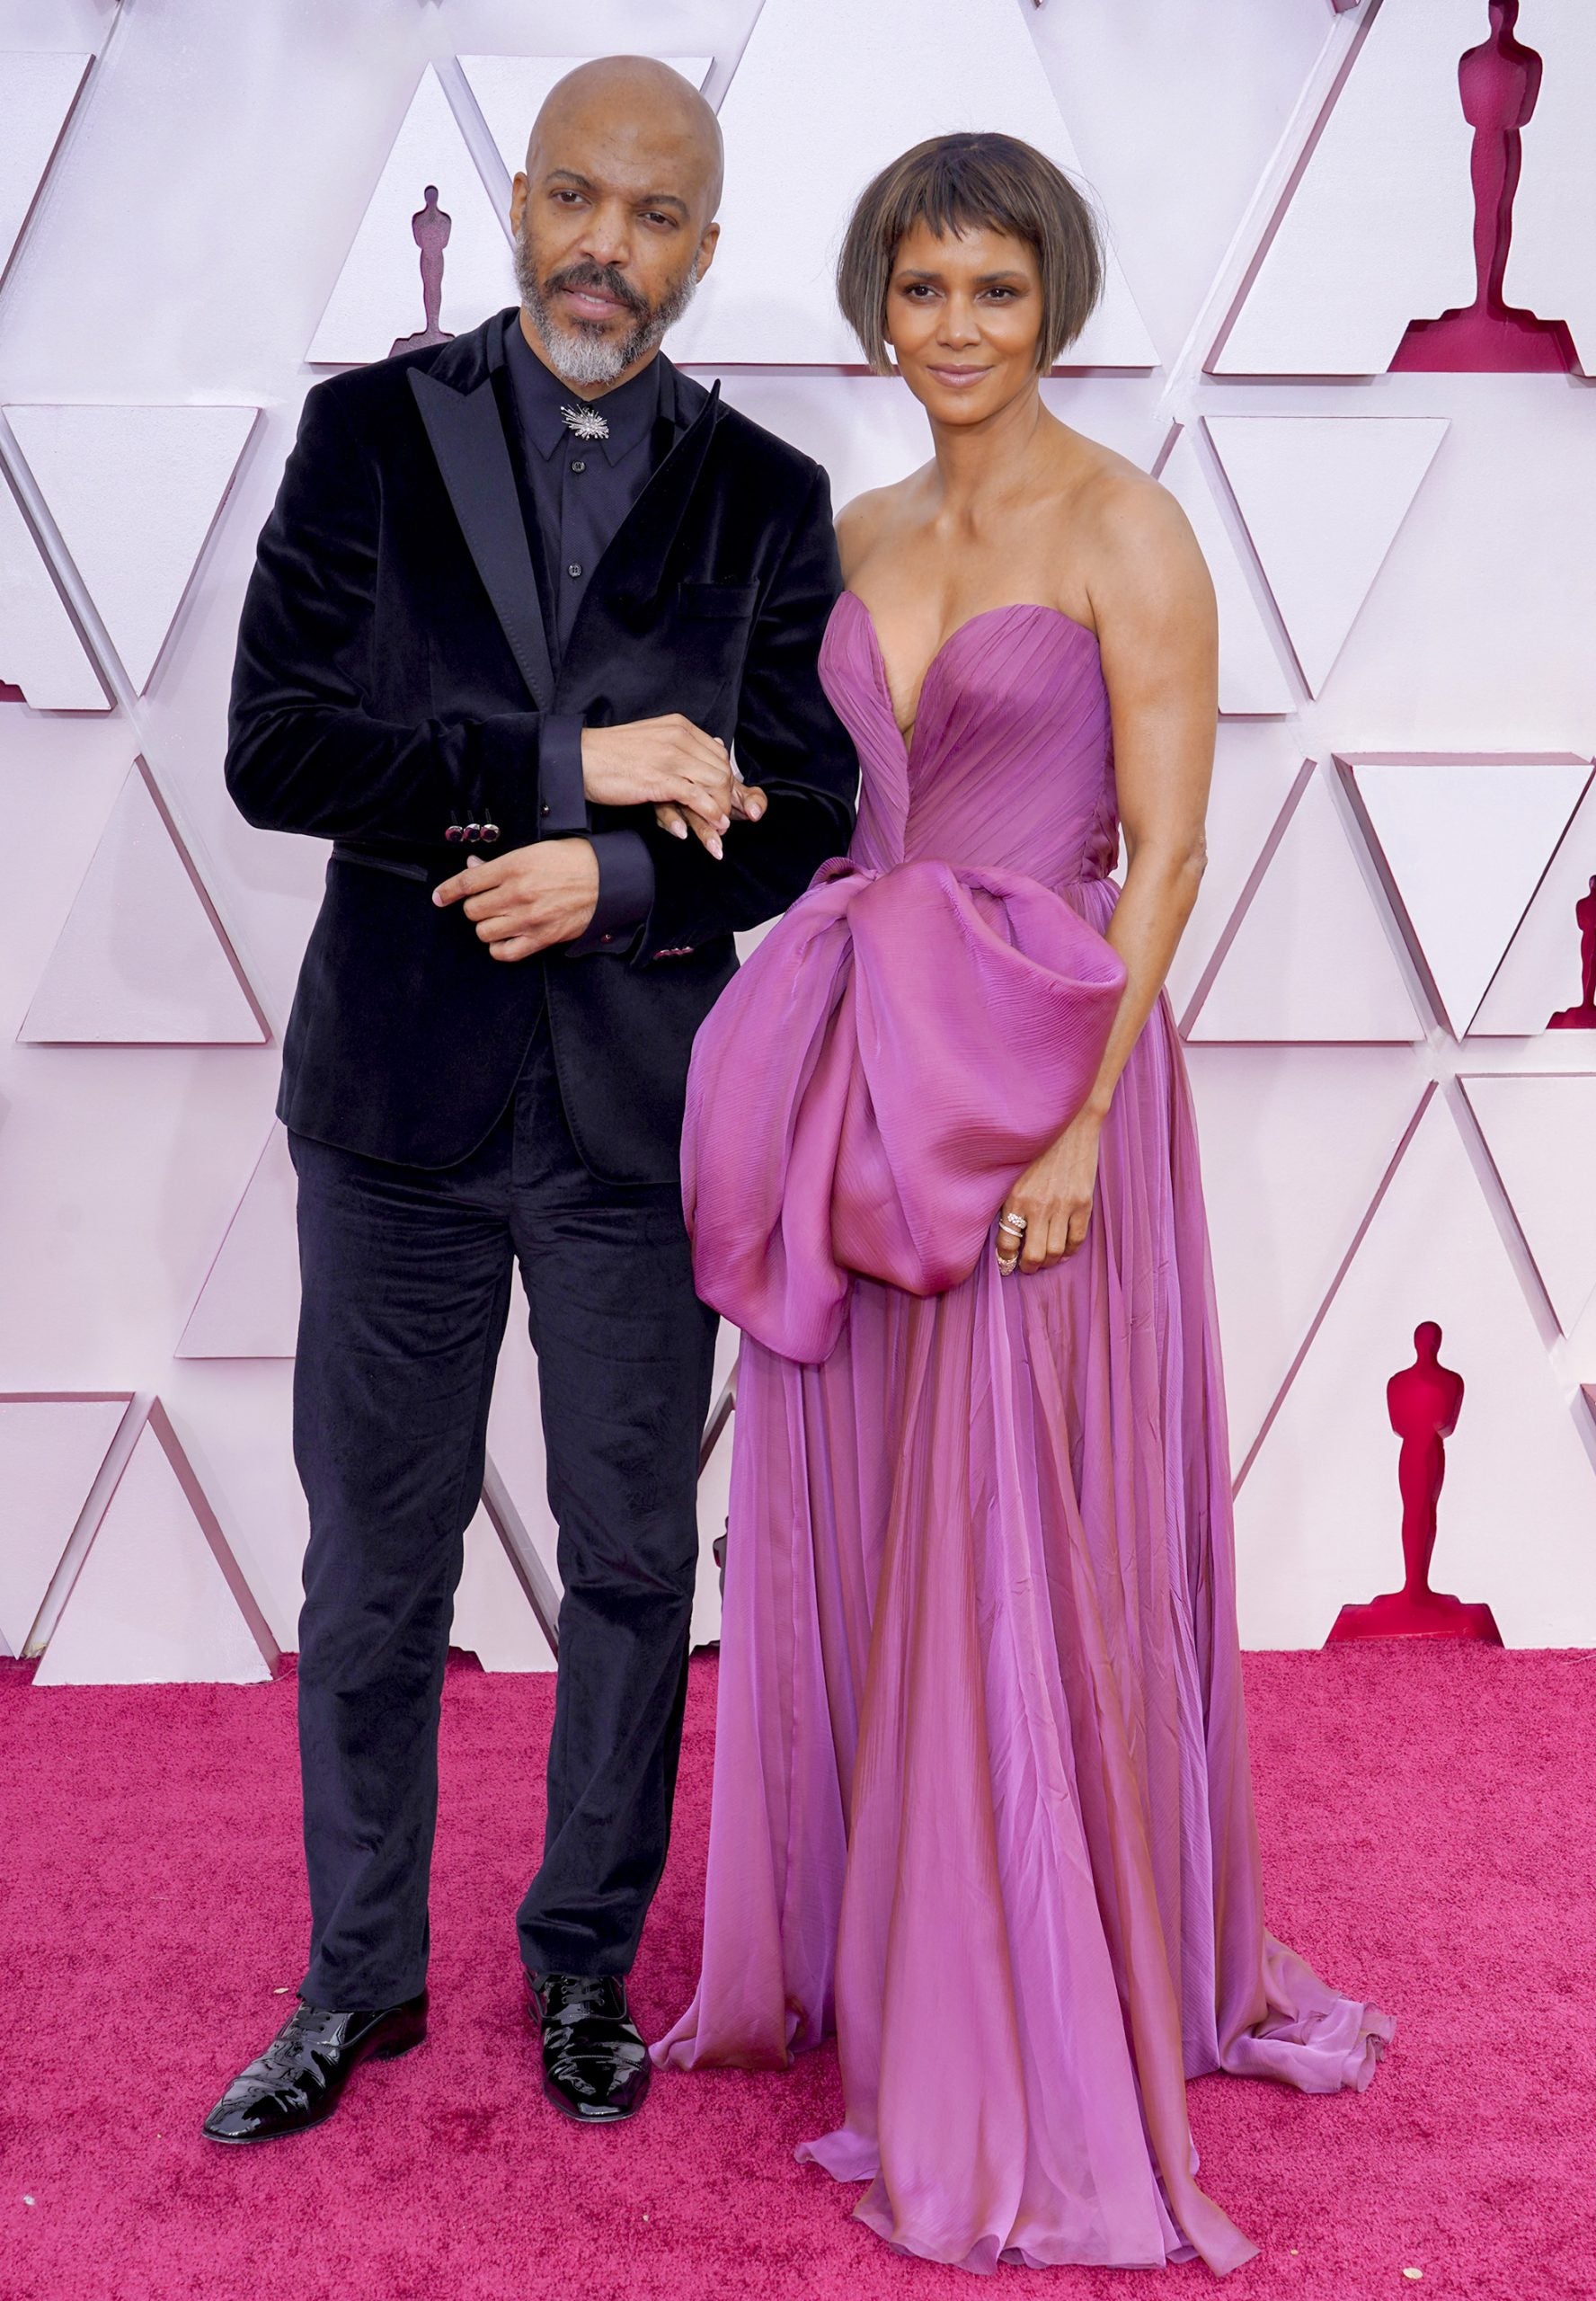 Black Celebrity Couples In Love And Looking Lovely At The 2021 Oscars